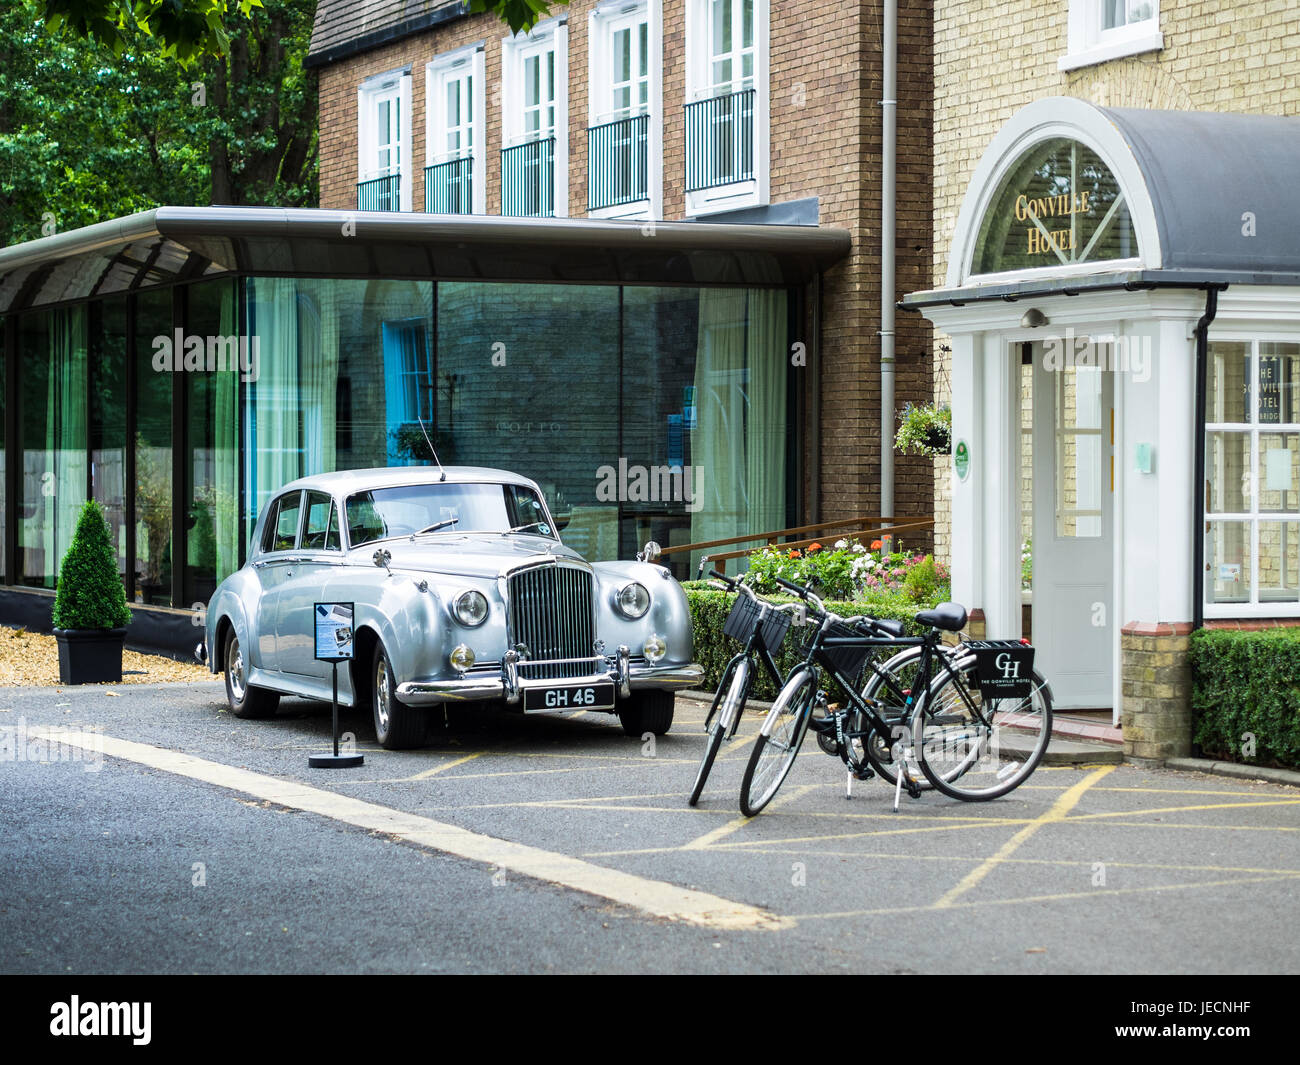 A vintage Bentley S1 outside the Luxury Gonville Hotel in Cambridge UK Stock Photo